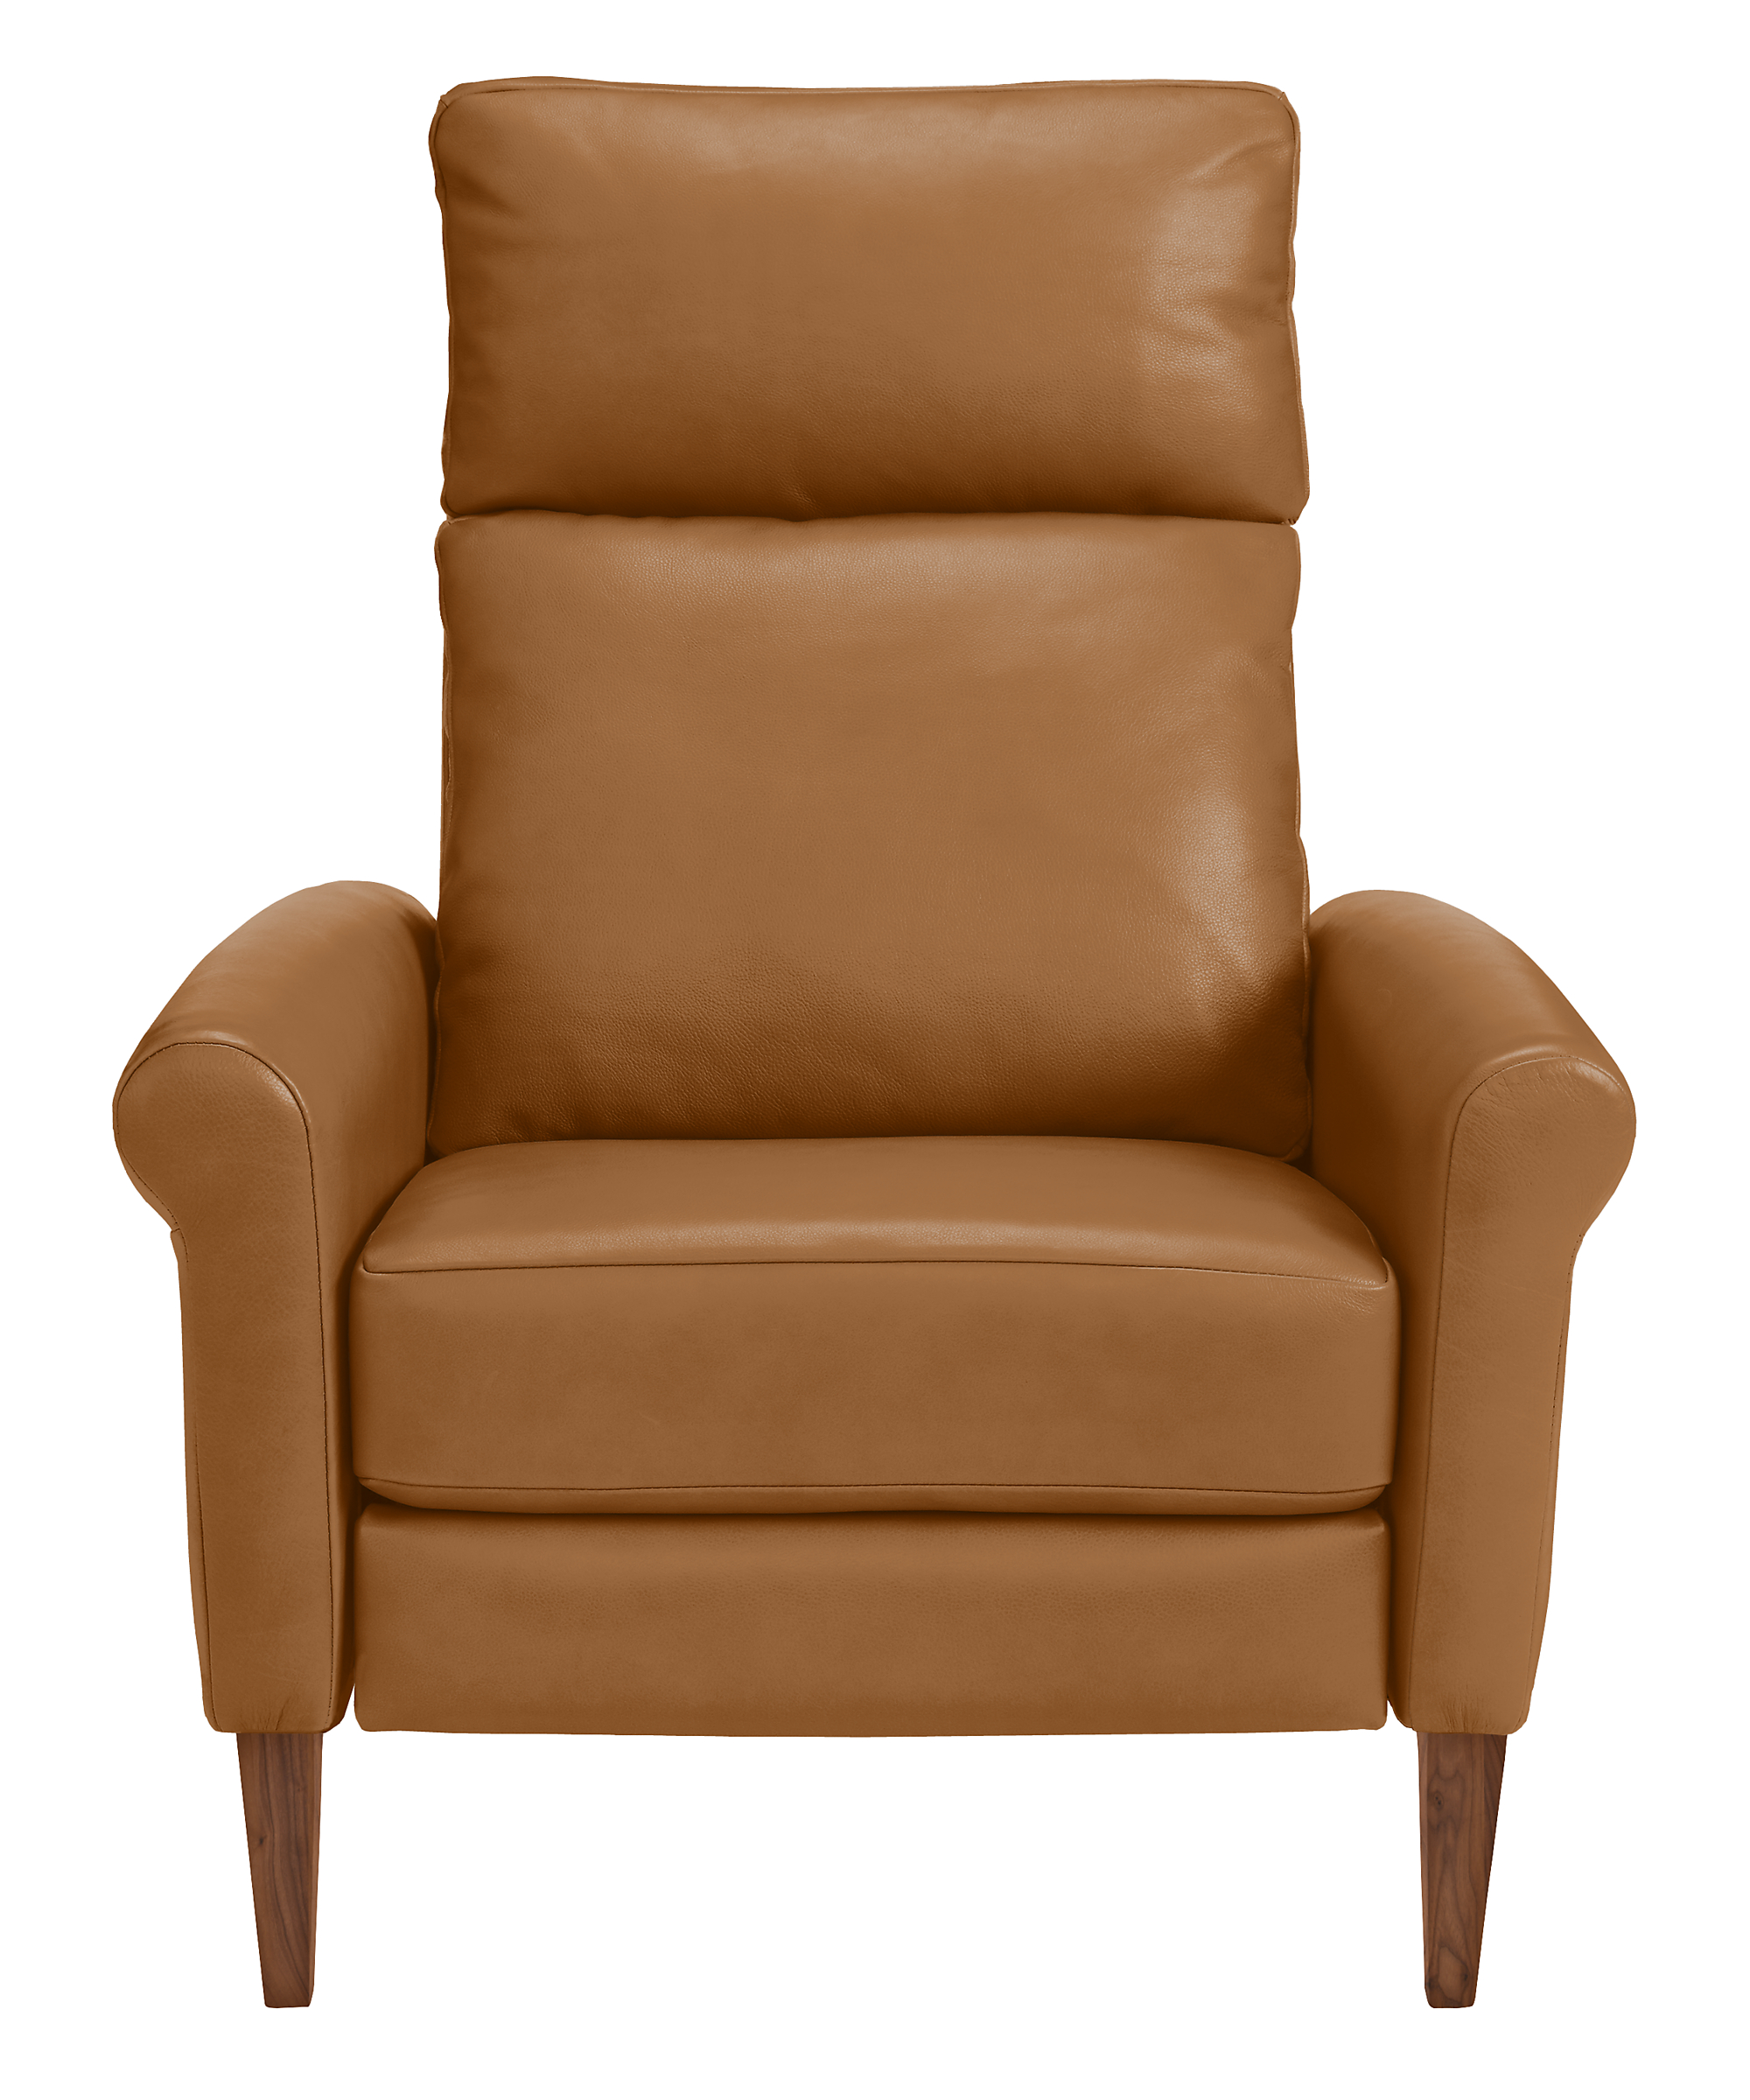 Wynton Leather Recliners